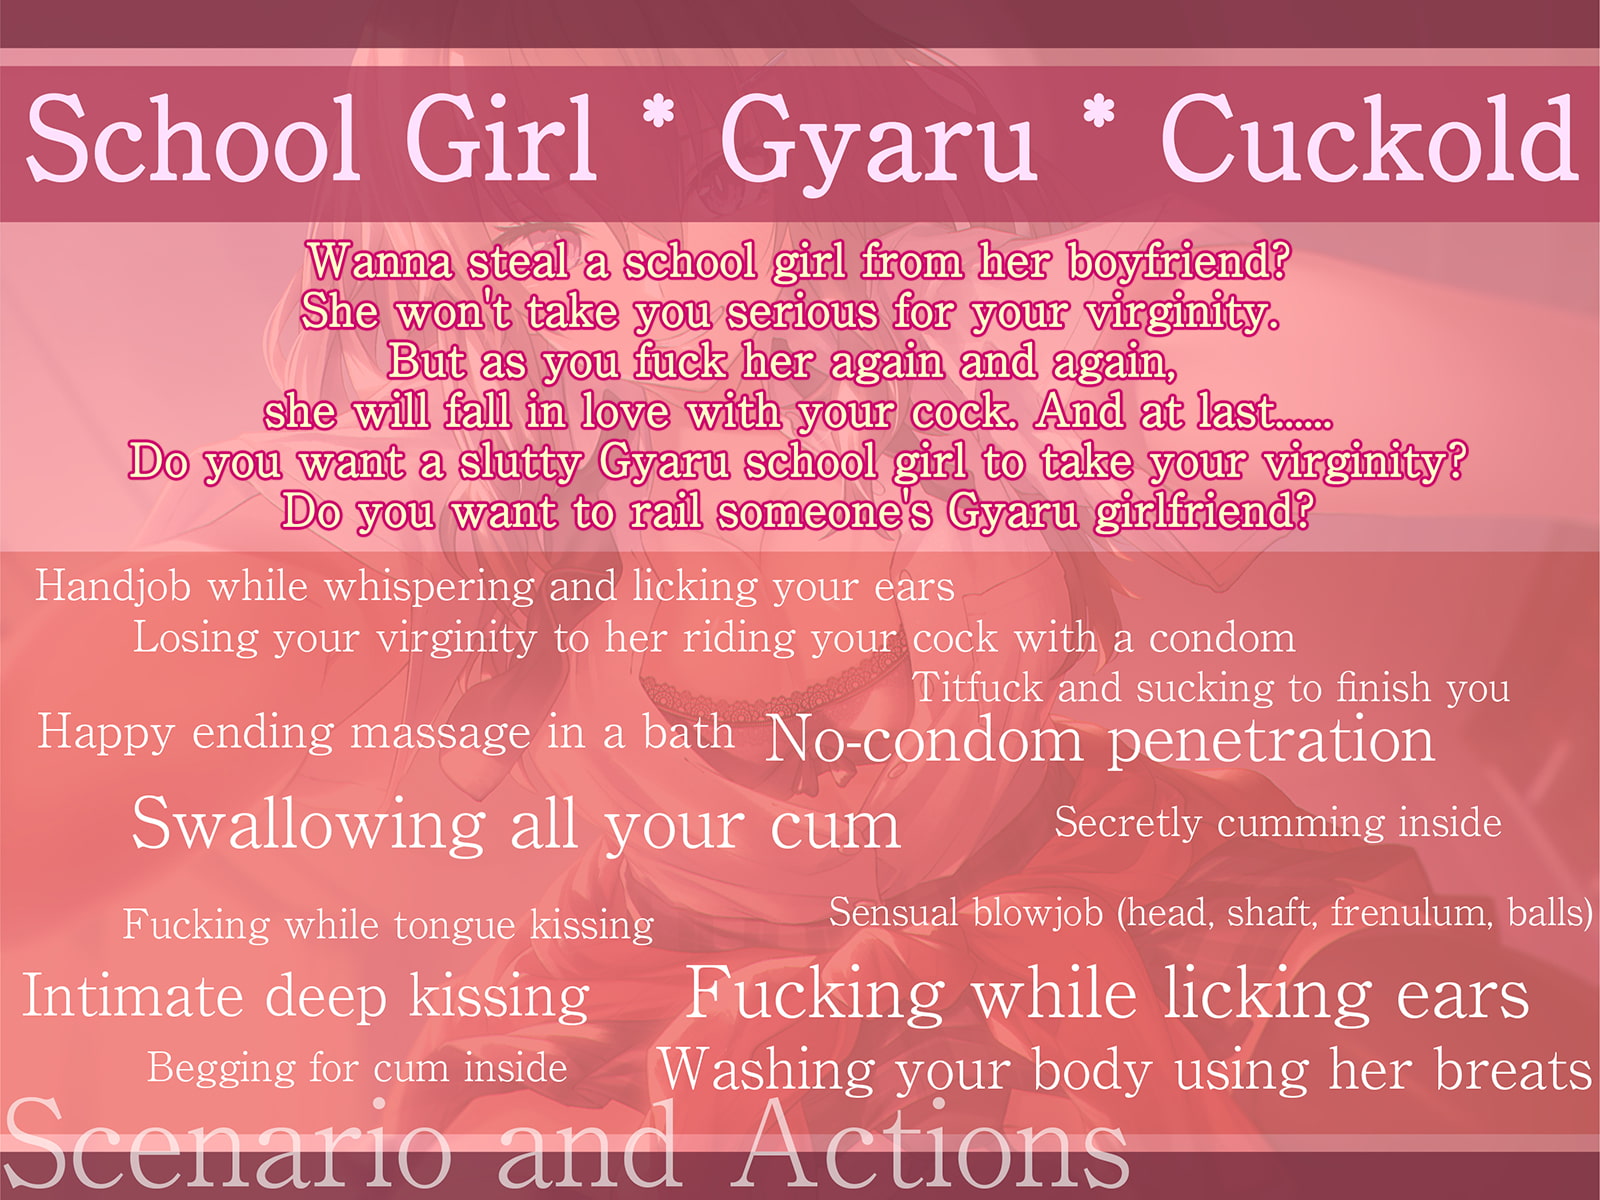 [ENG Ver.]【Gyaru*School Girl】A Bored School Girl Cheating On Her Boyfriend By Taking Your Virginity. I Was Just Fooling Around, But.